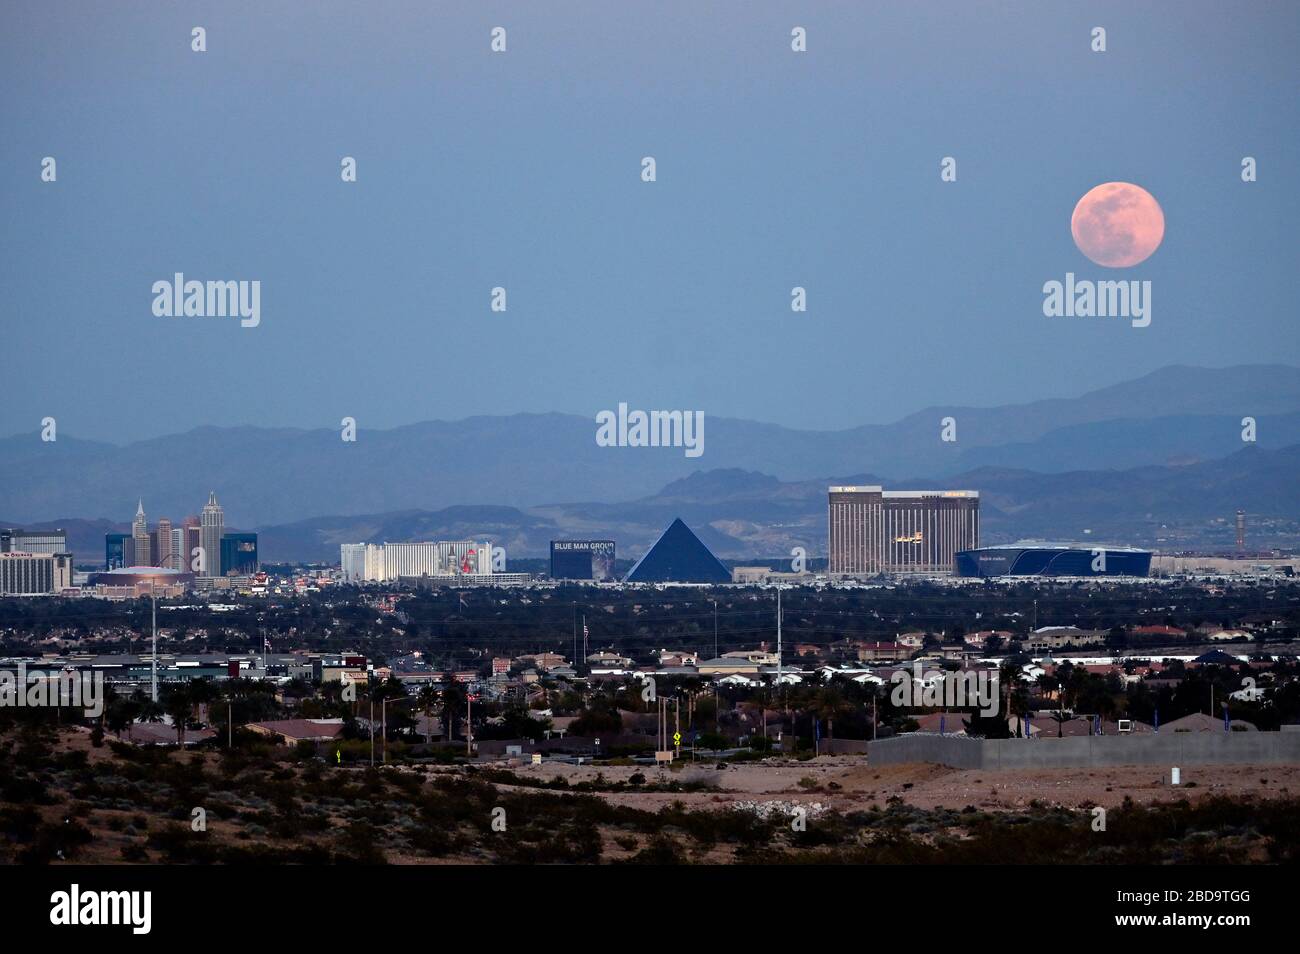 Las Vegas, Nevada, USA. 7th Apr, 2020. The super pink moon, the biggest supermoon of the year, rises over the Las Vegas Strip on April 7, 2020 in Las Vegas, Nevada. The pink moon got its name because the April full moon occurs at the same time as the pink wildflower Phlox subulata blooms in North America. A supermoon occurs when a full moon coincides with its perigee, which is its closest approach to the Earth. Credit: David Becker/ZUMA Wire/Alamy Live News Stock Photo